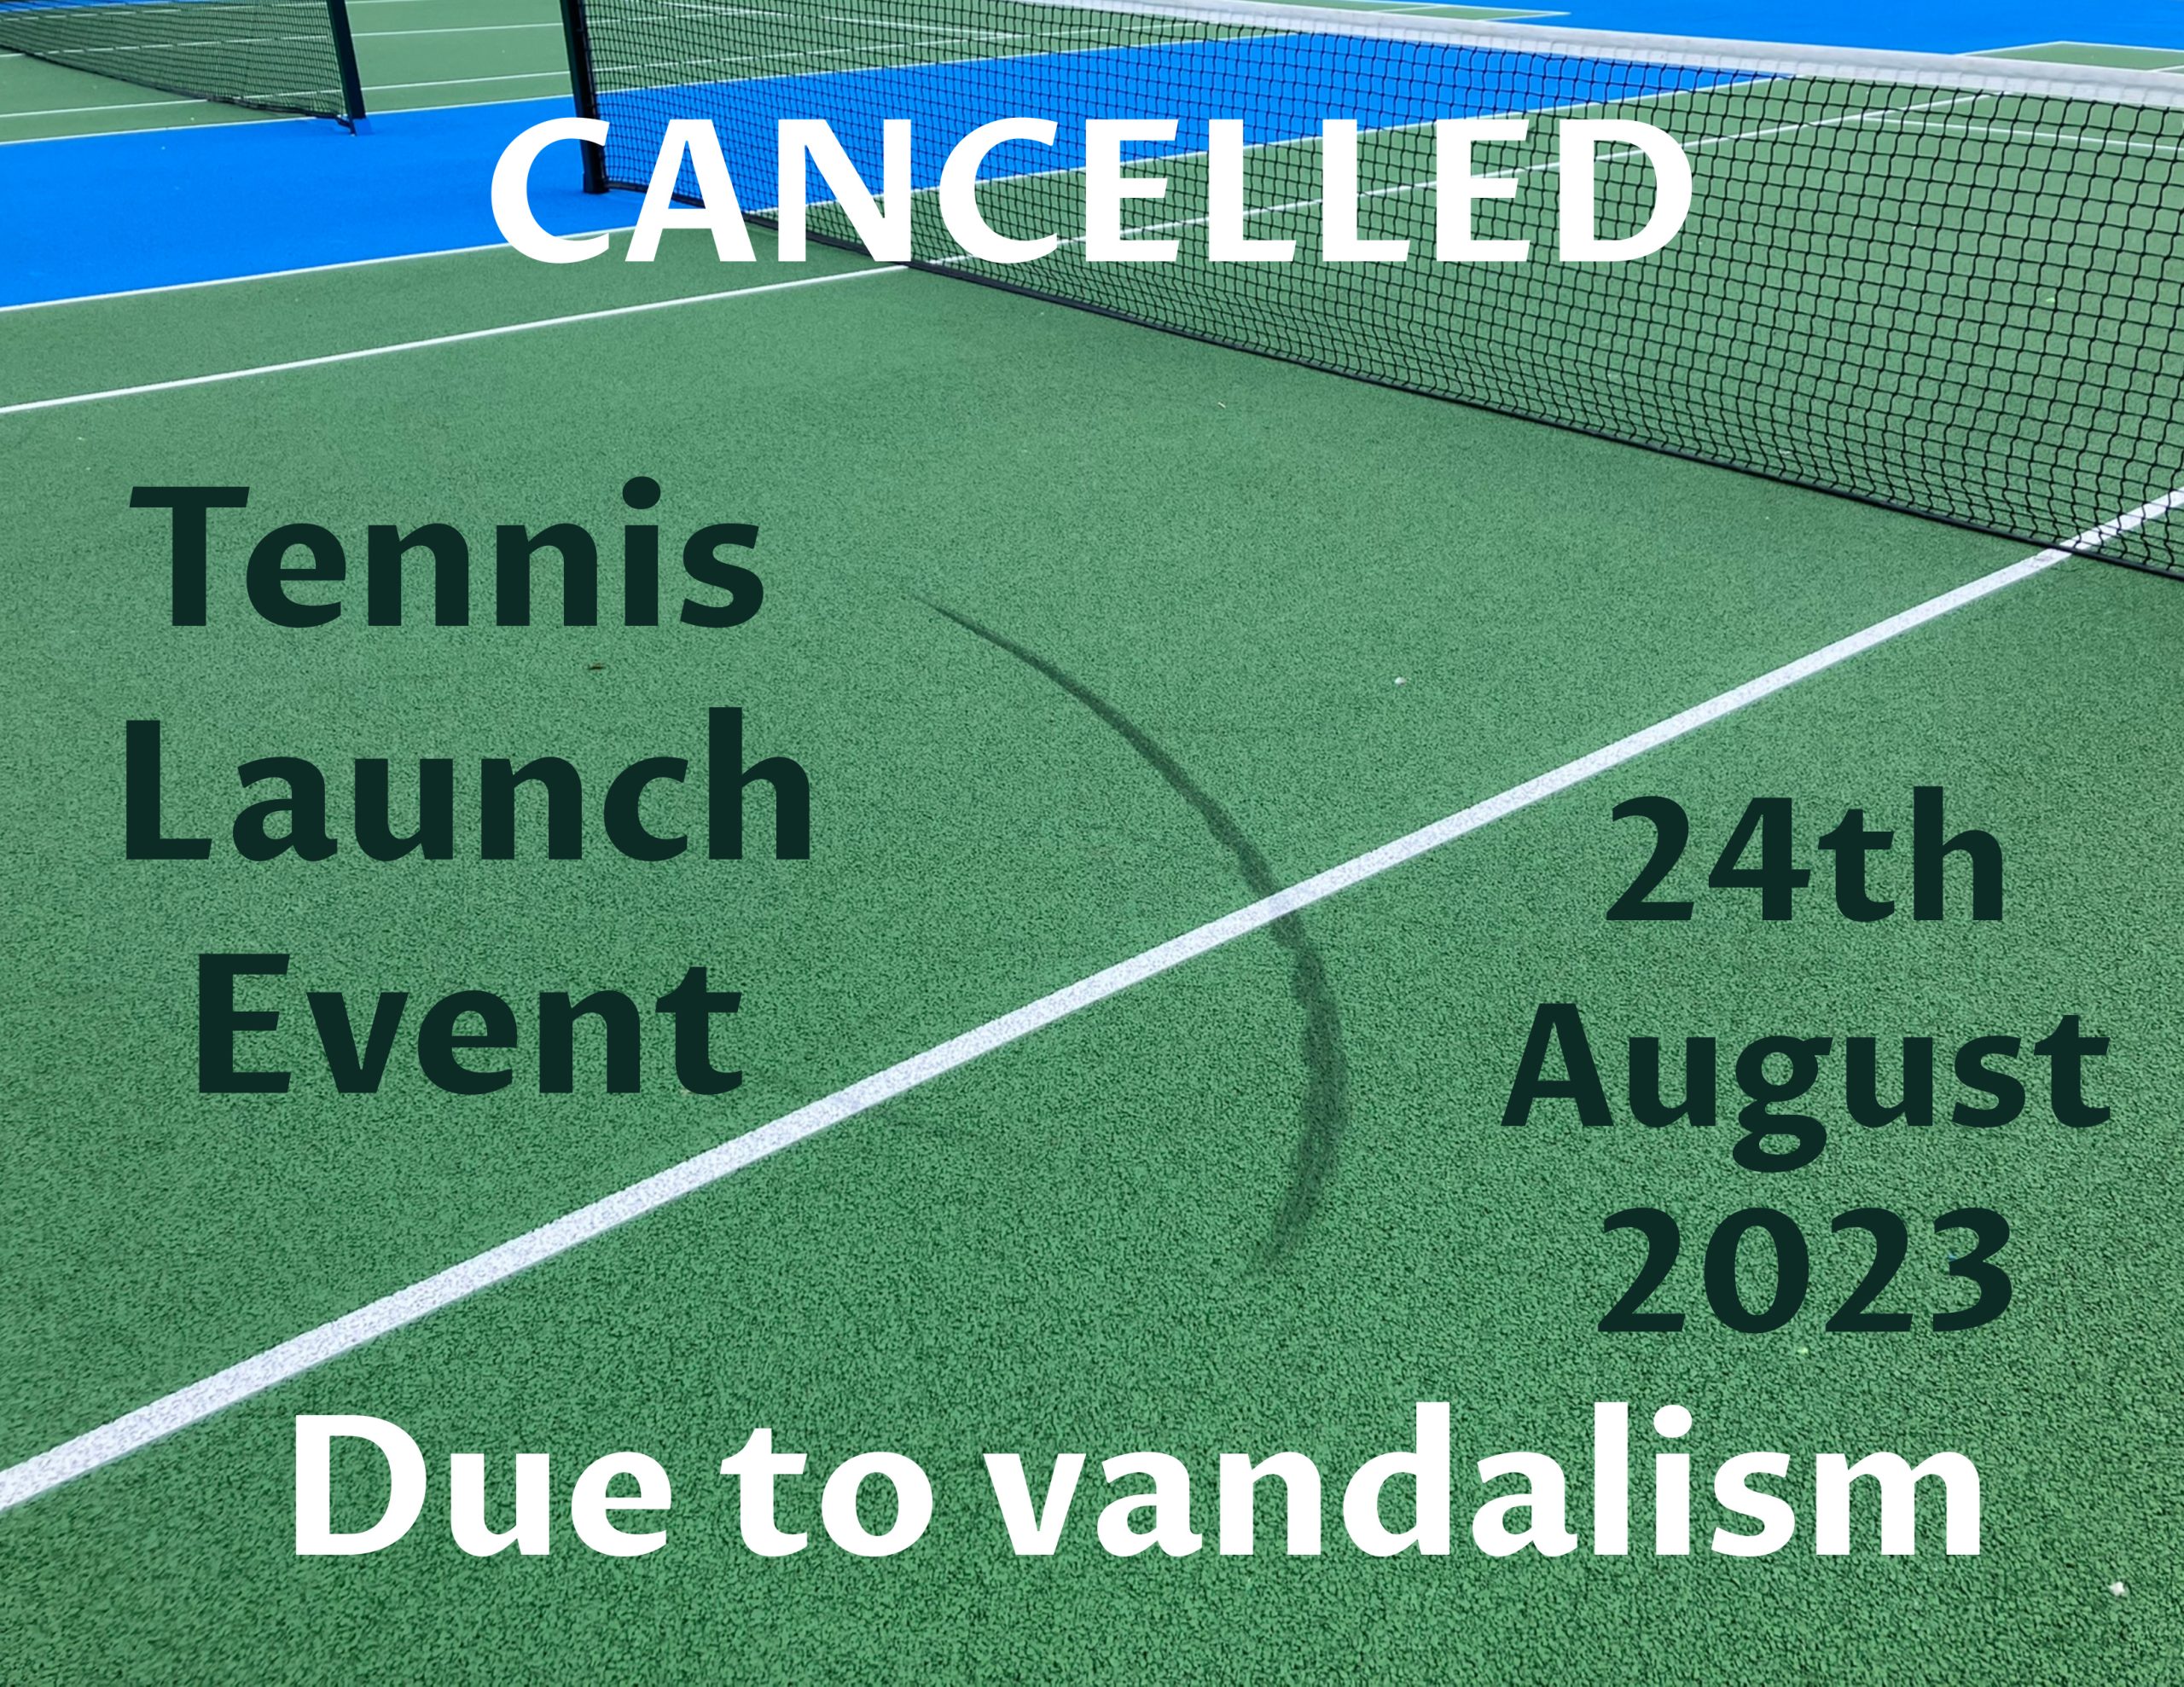 STC & LTA Tennis Launch Event – Cancelled Due to Vandalism